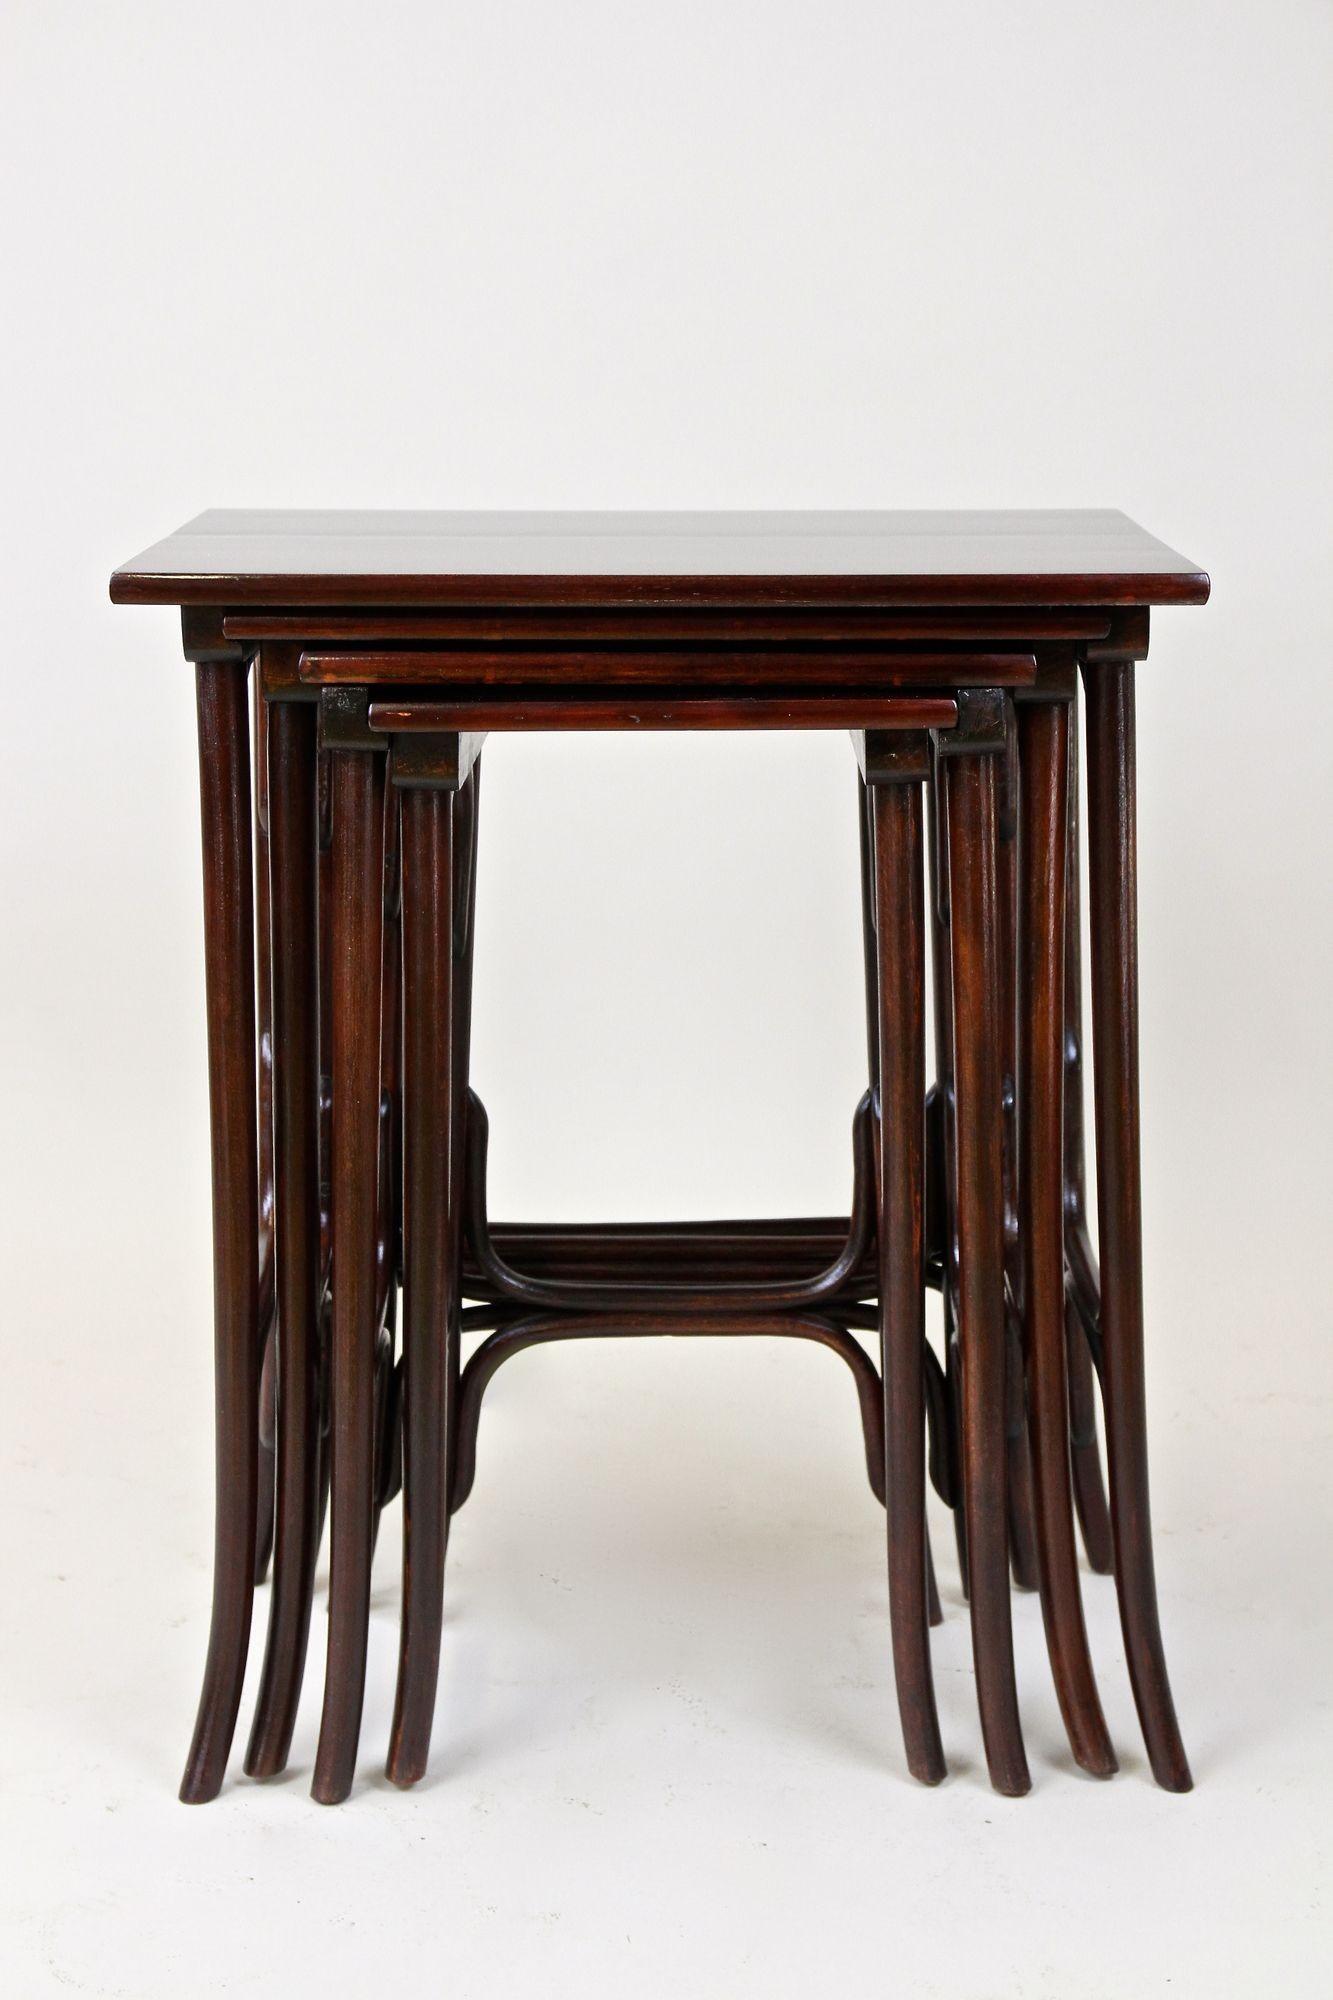 20th Century Art Nouveau Bentwood Nesting Tables by Thonet, Marked, Austria circa 1905